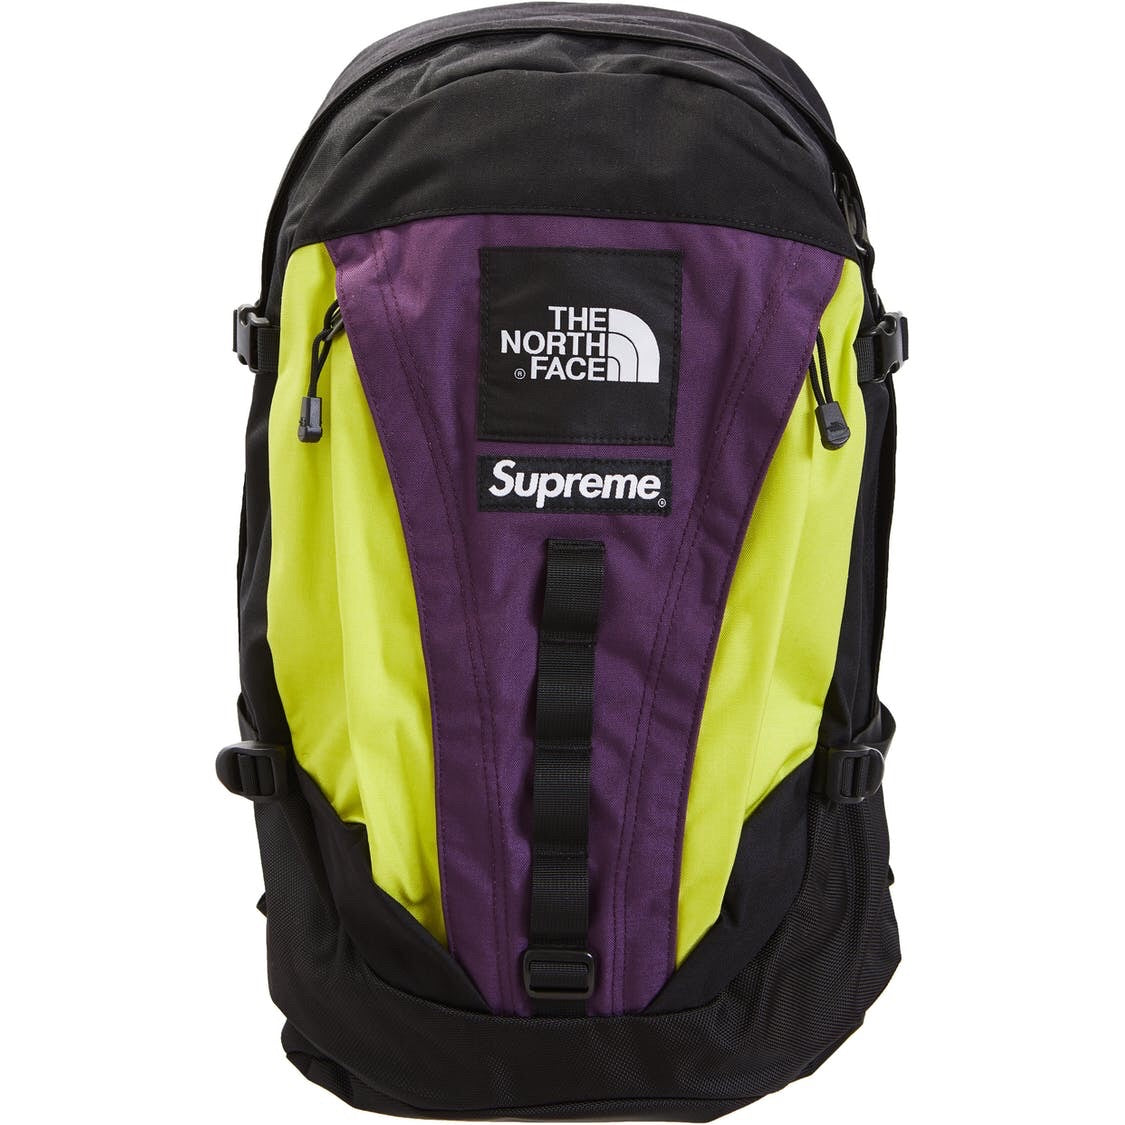 Supreme x The north face Expedition backpack - sulfur - Centrall Online